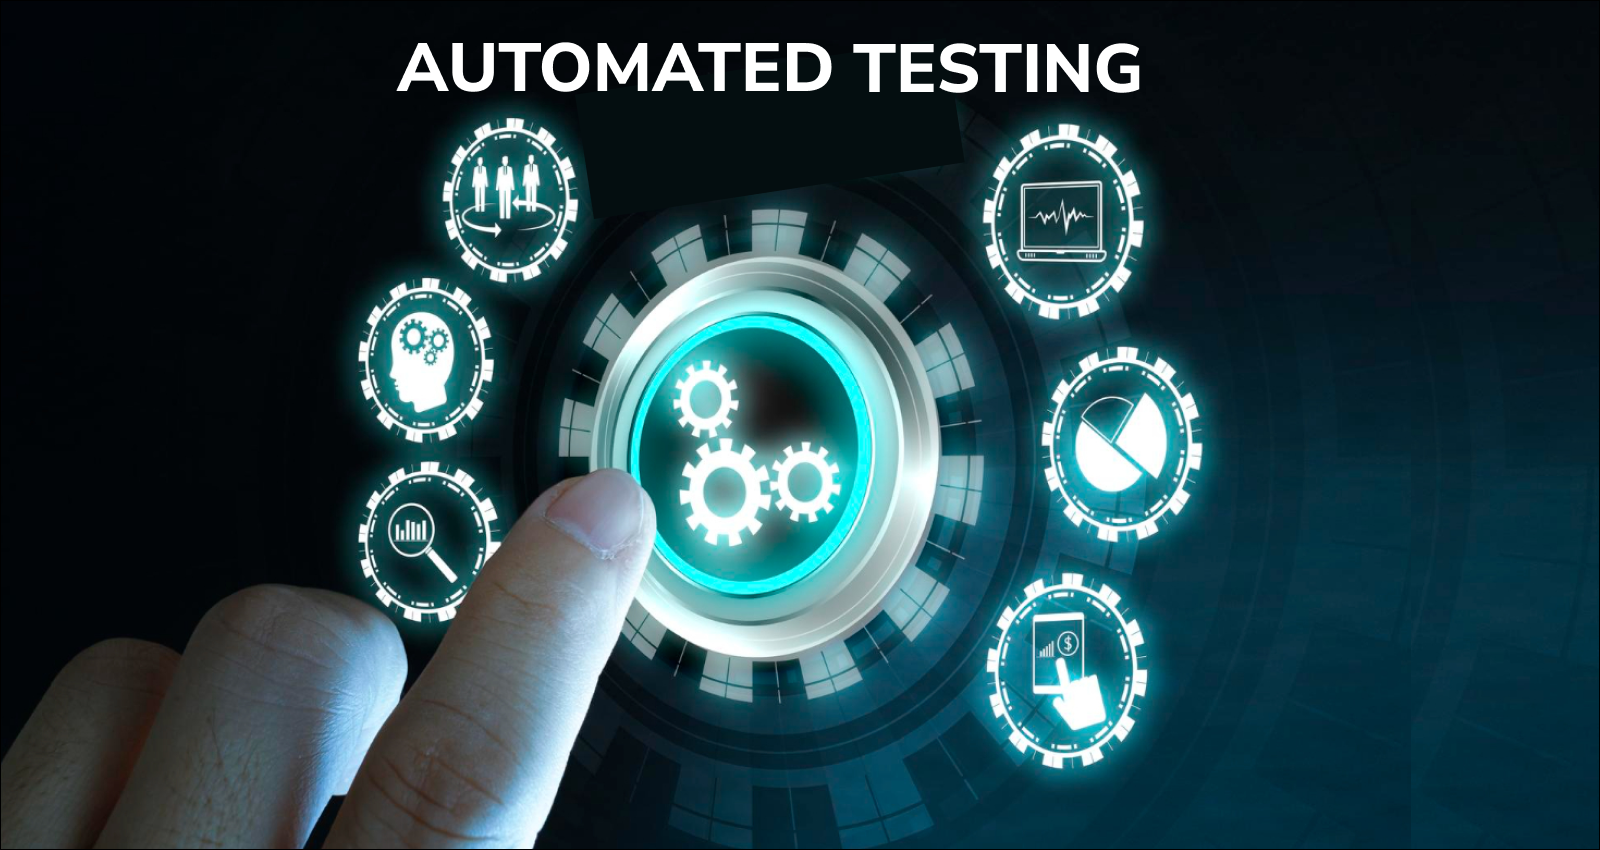 Automated Testing, Quality Assurance, Software testing, Testing benefits, challenges & advantages